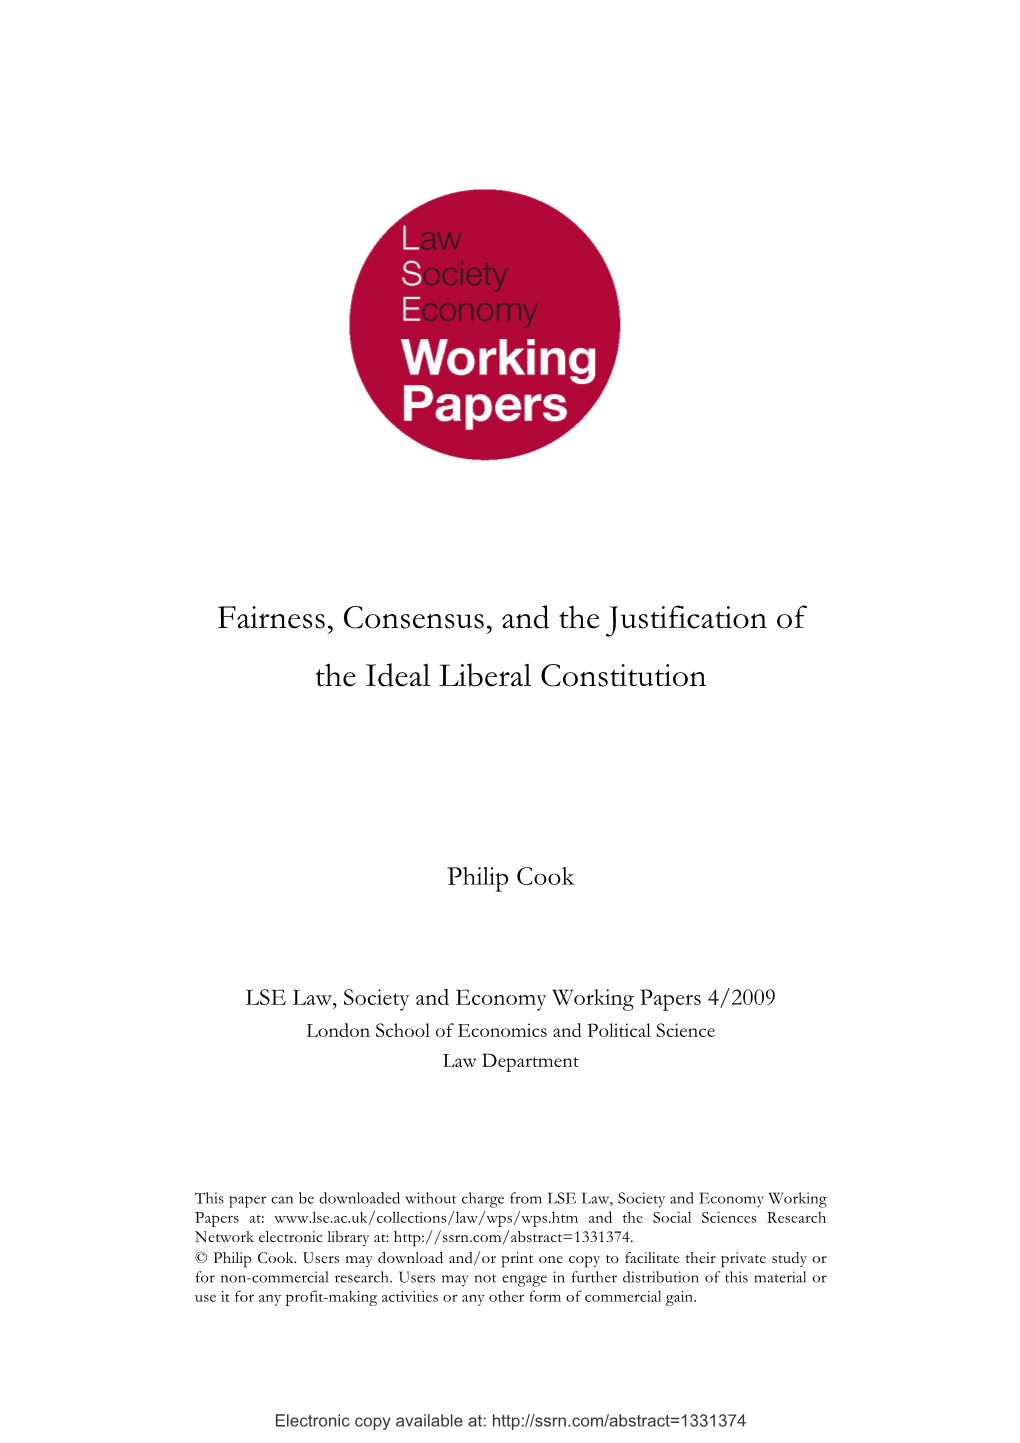 Fairness, Consensus, and the Justification of the Ideal Liberal Constitution